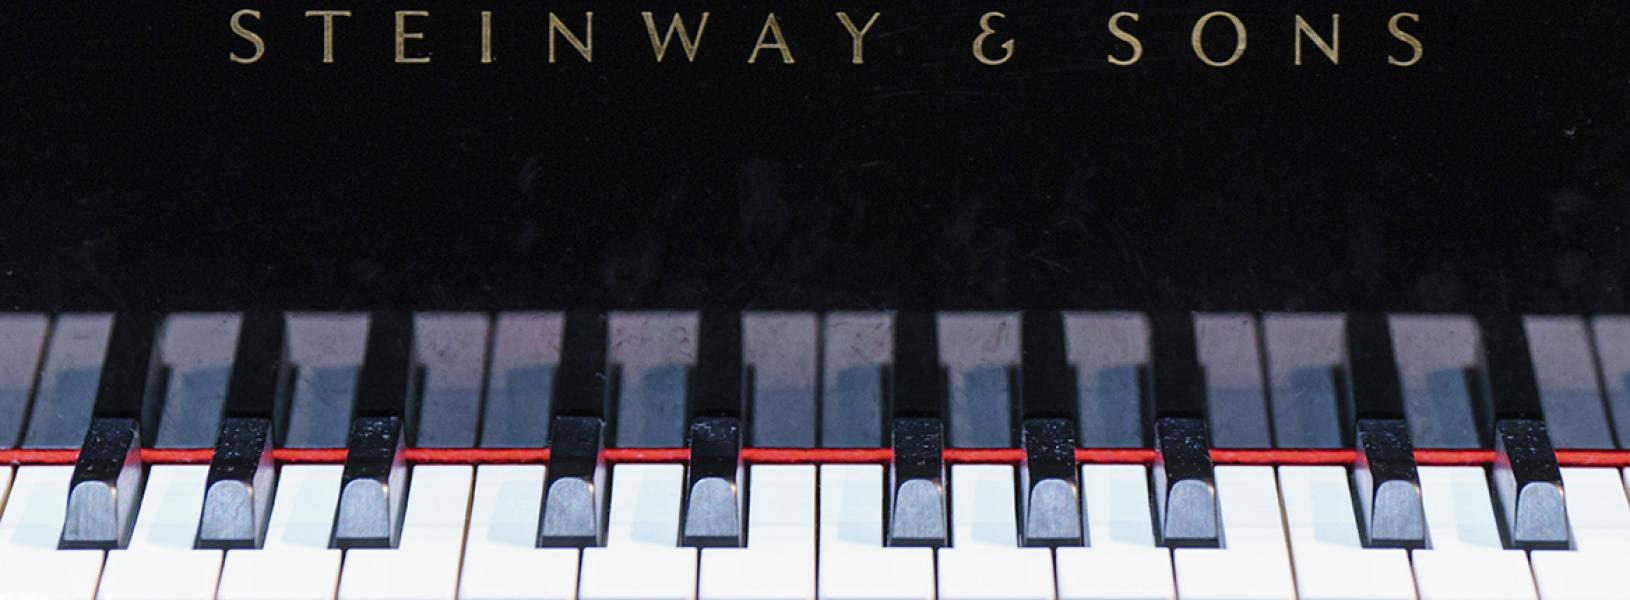 The keys of a Steinway piano looking head-on.